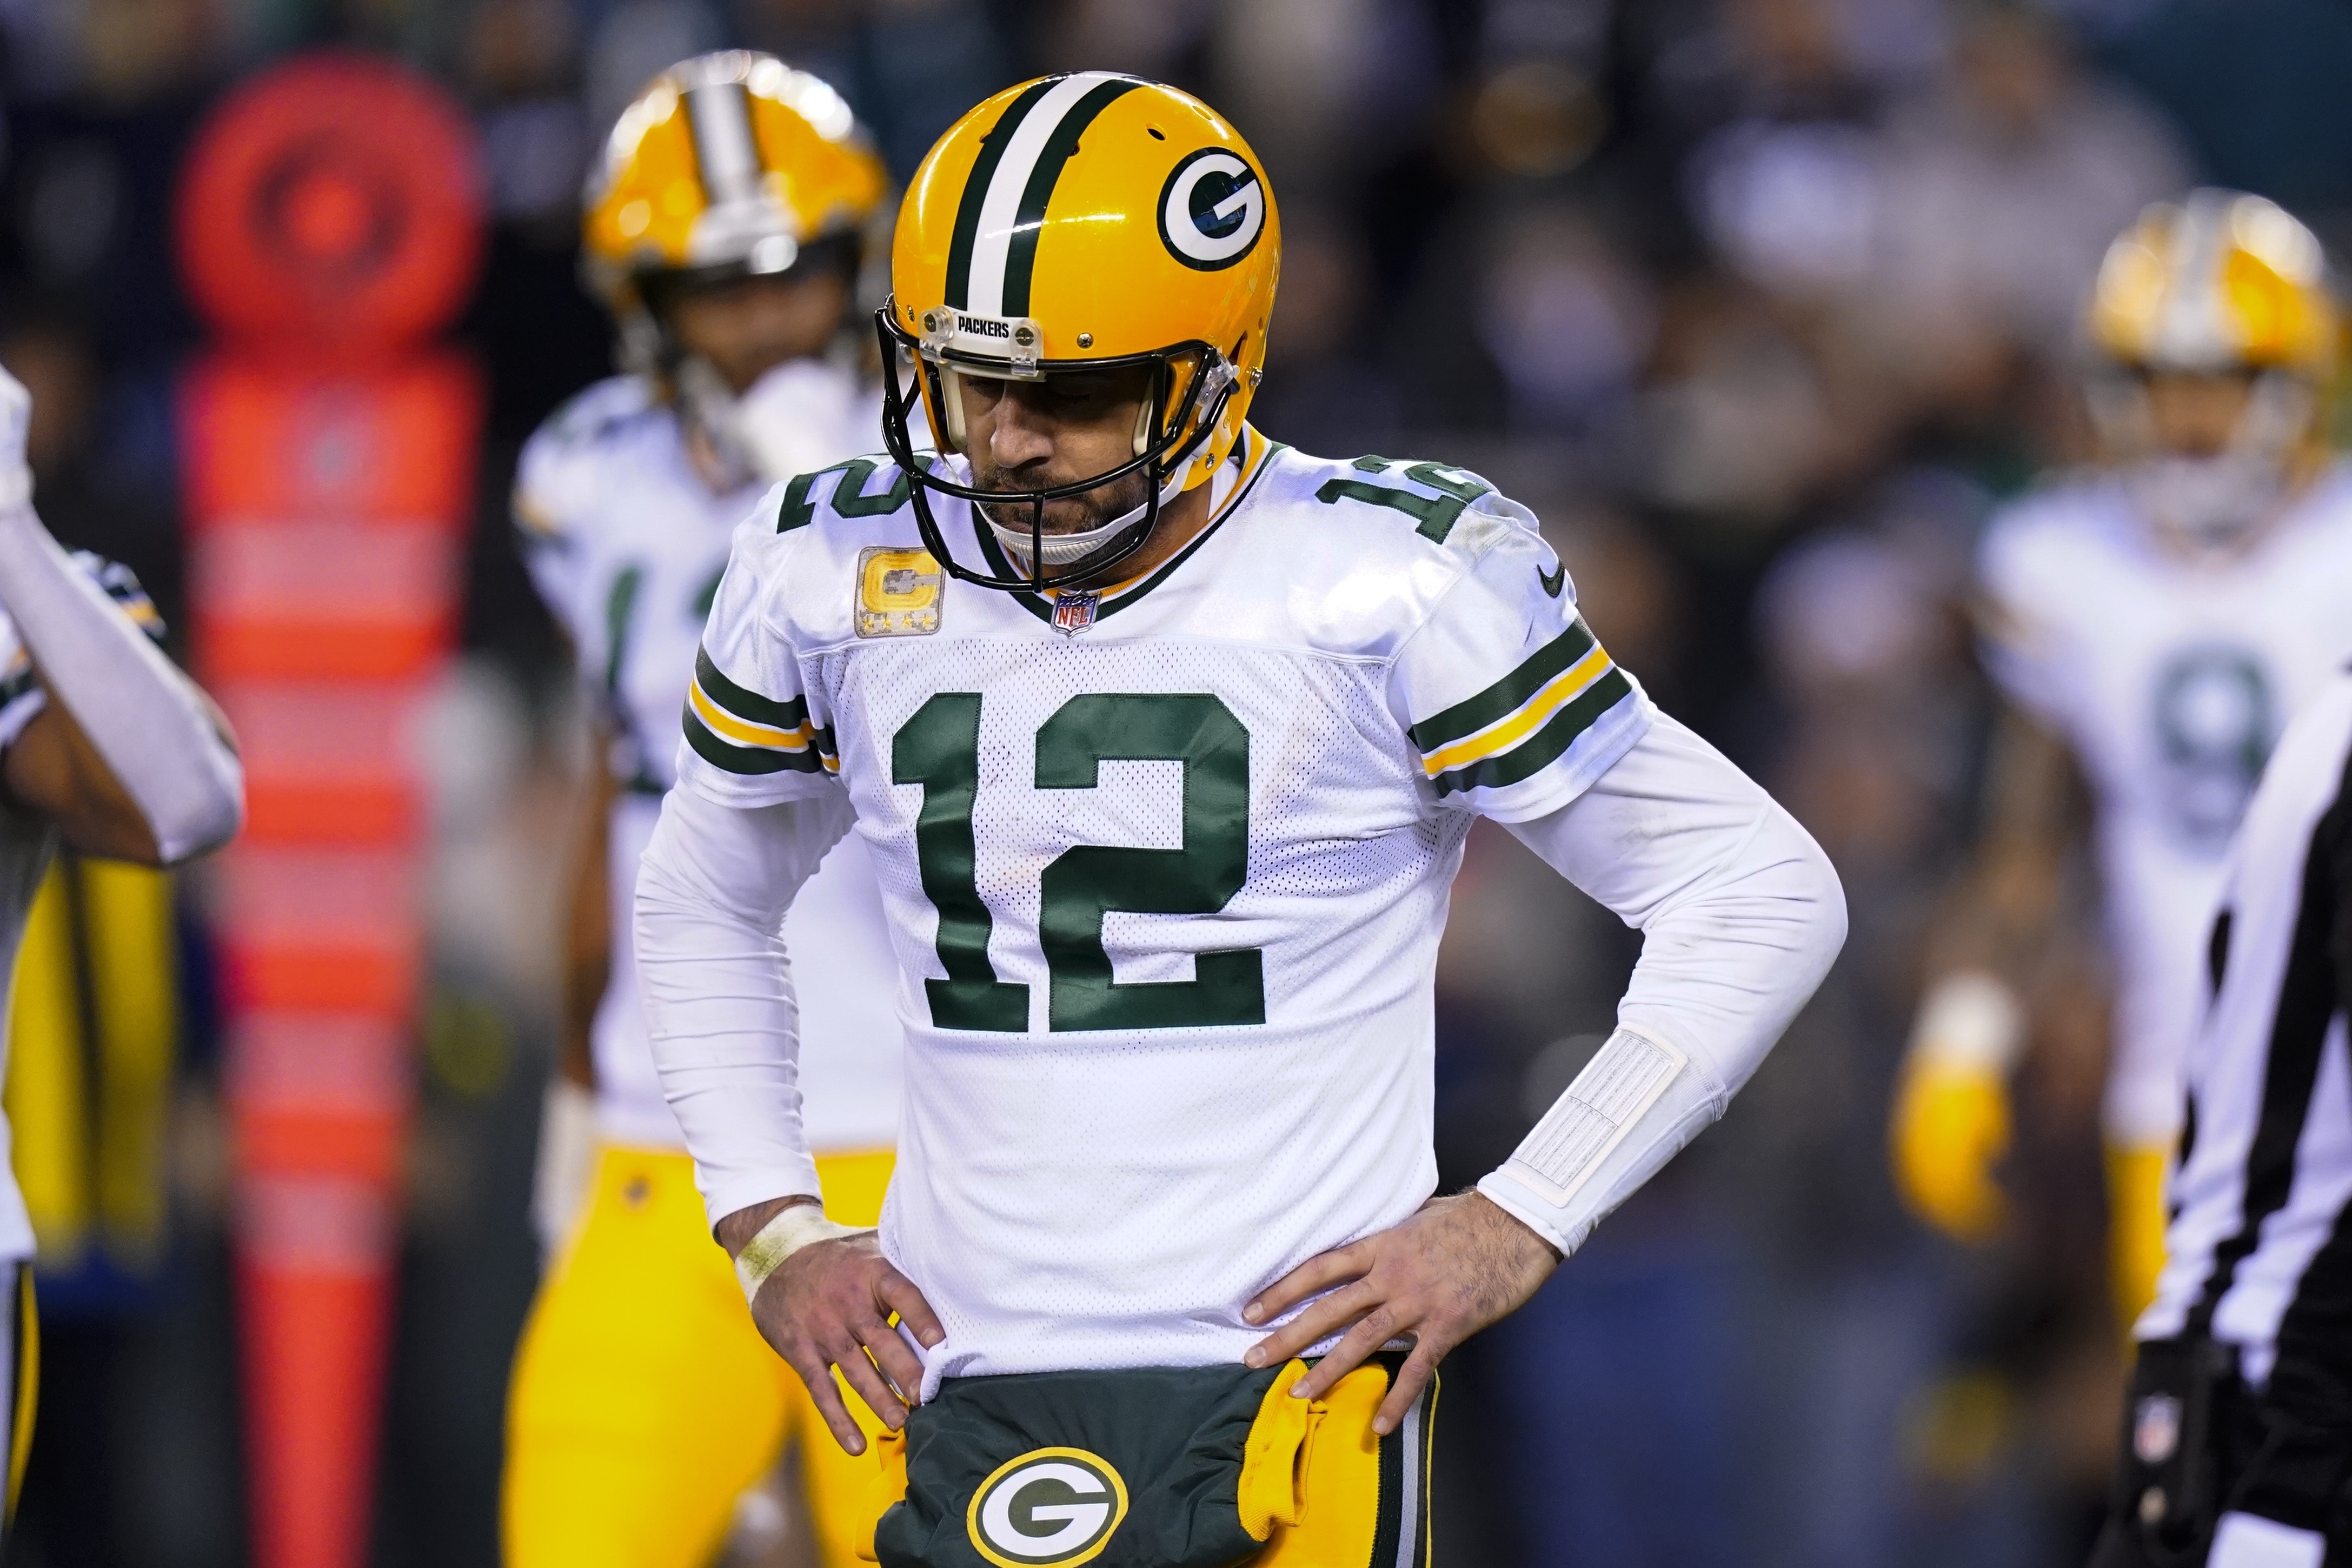 Aaron Rodgers injury update: Packers QB leaves 'Sunday Night